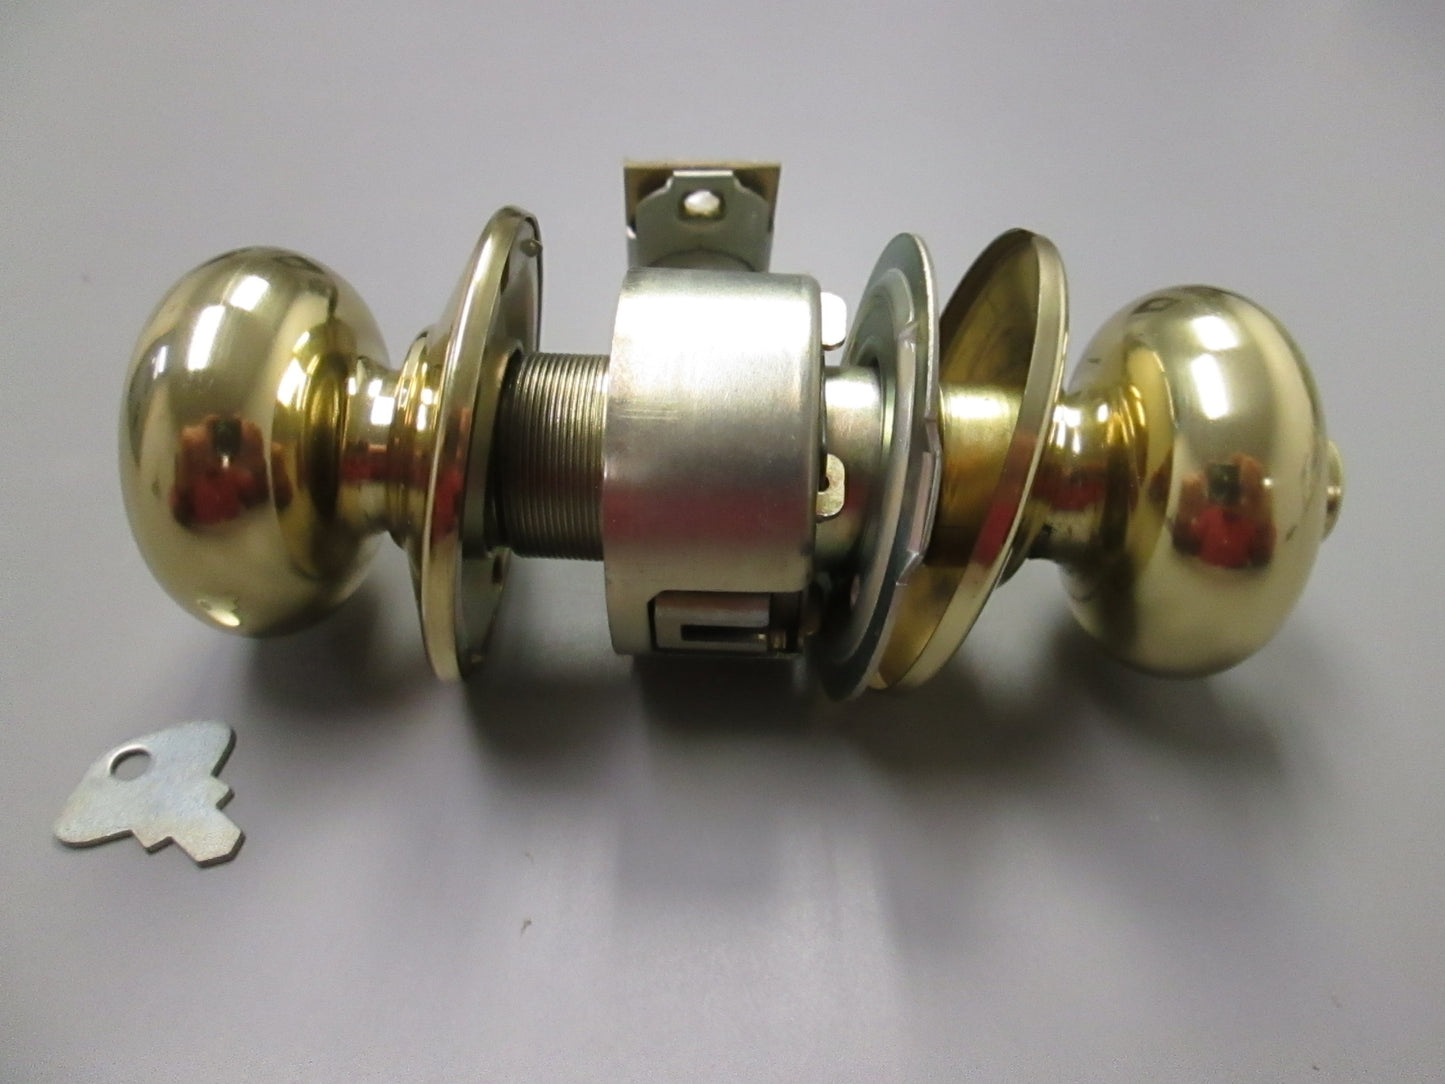 Arrow M02TA Cylindrical Privacy Set with Tudor Style Knobs Polished Brass